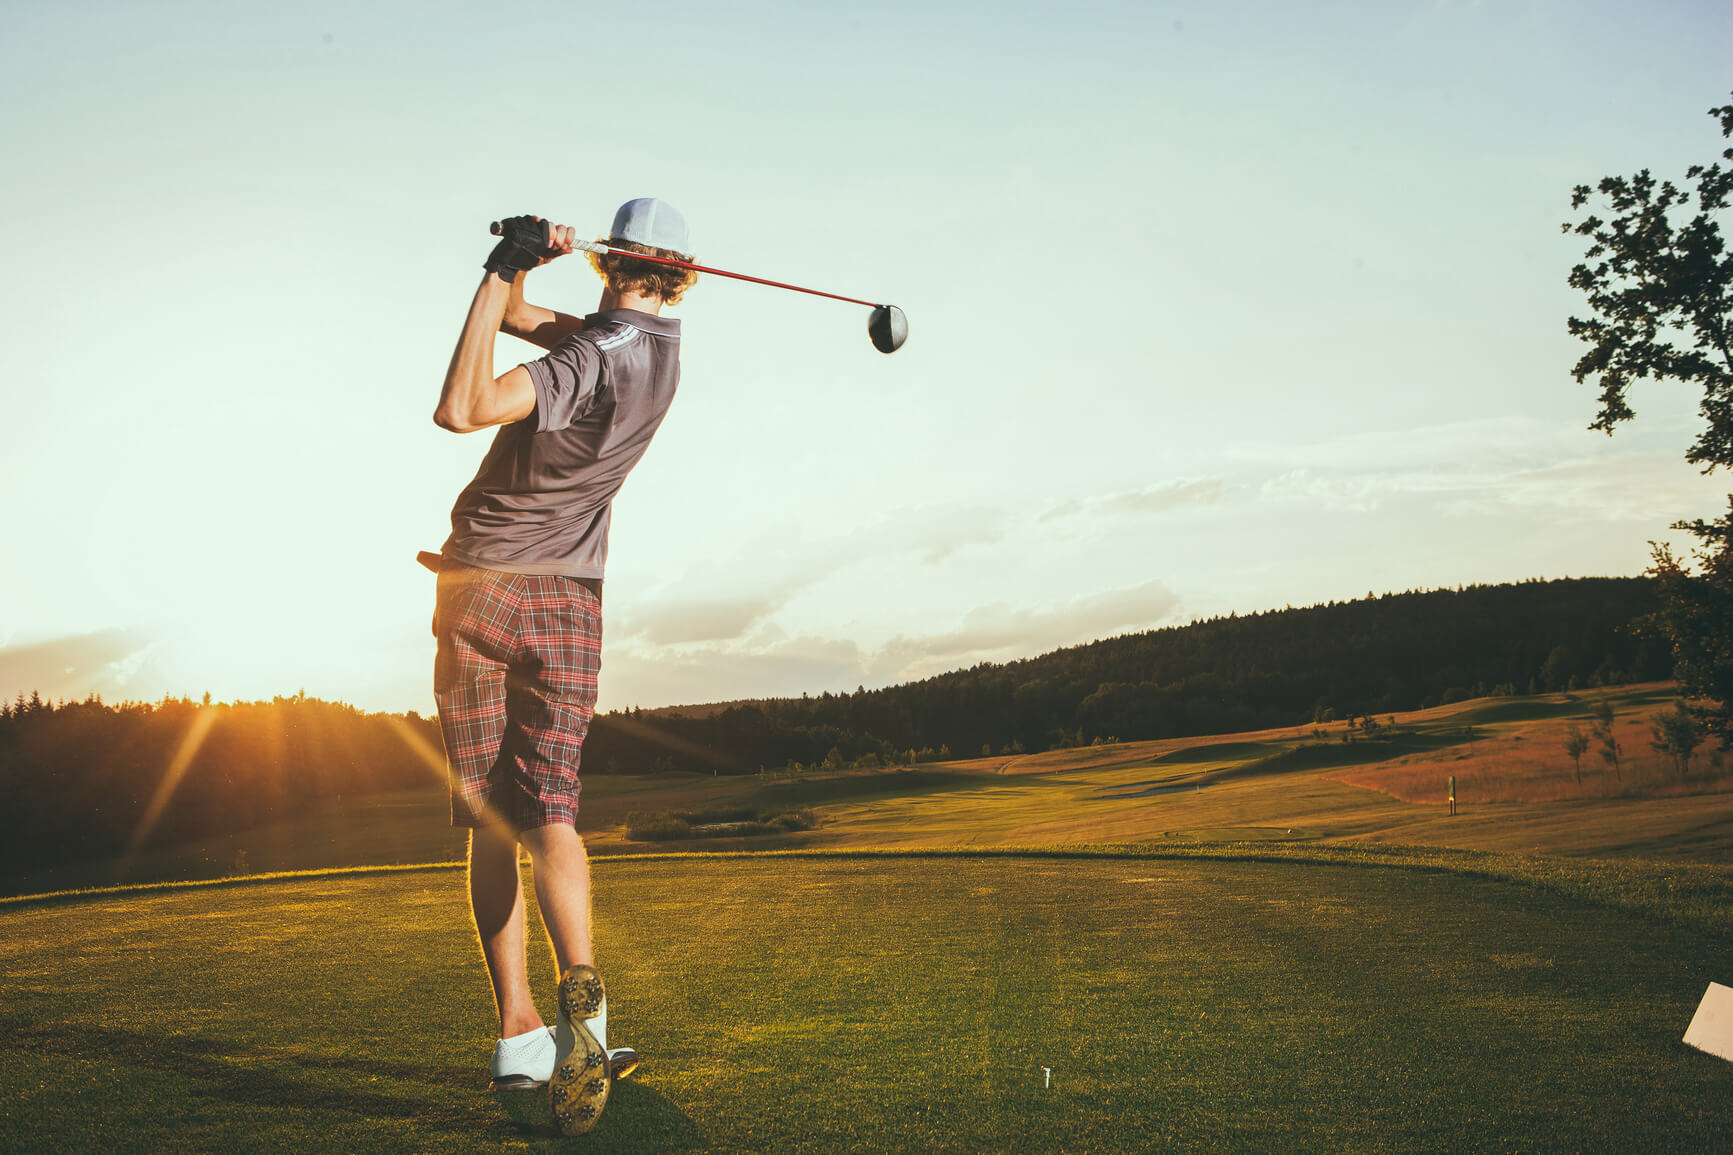 Teeing off regularly won’t only help your swing, but your physical wellbeing as well.